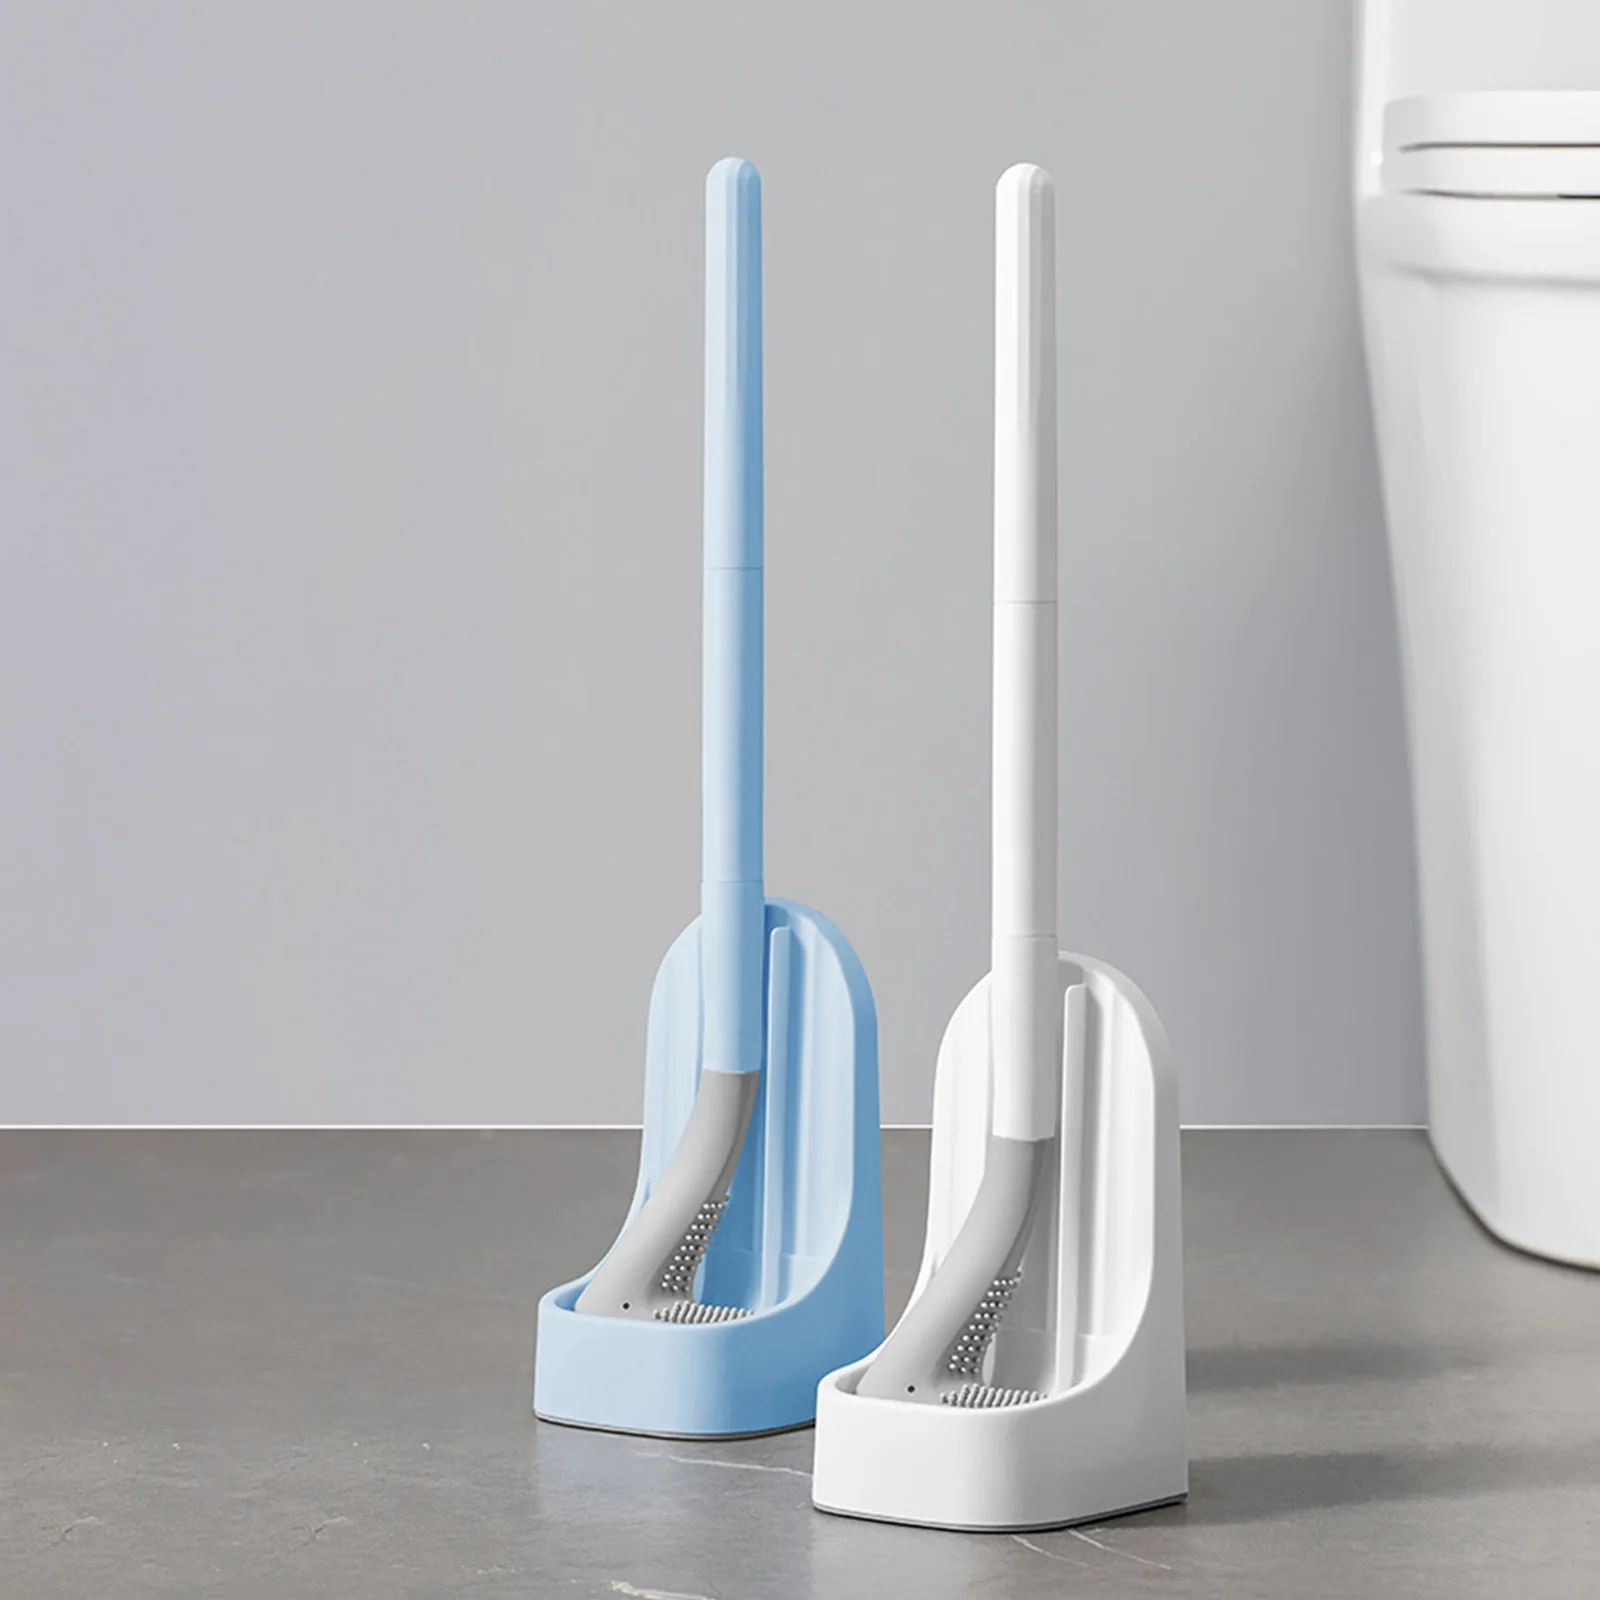 Silicone Bristles Toilet Brush and Holder Set with Tweezers - White - by  ELITRA HOME